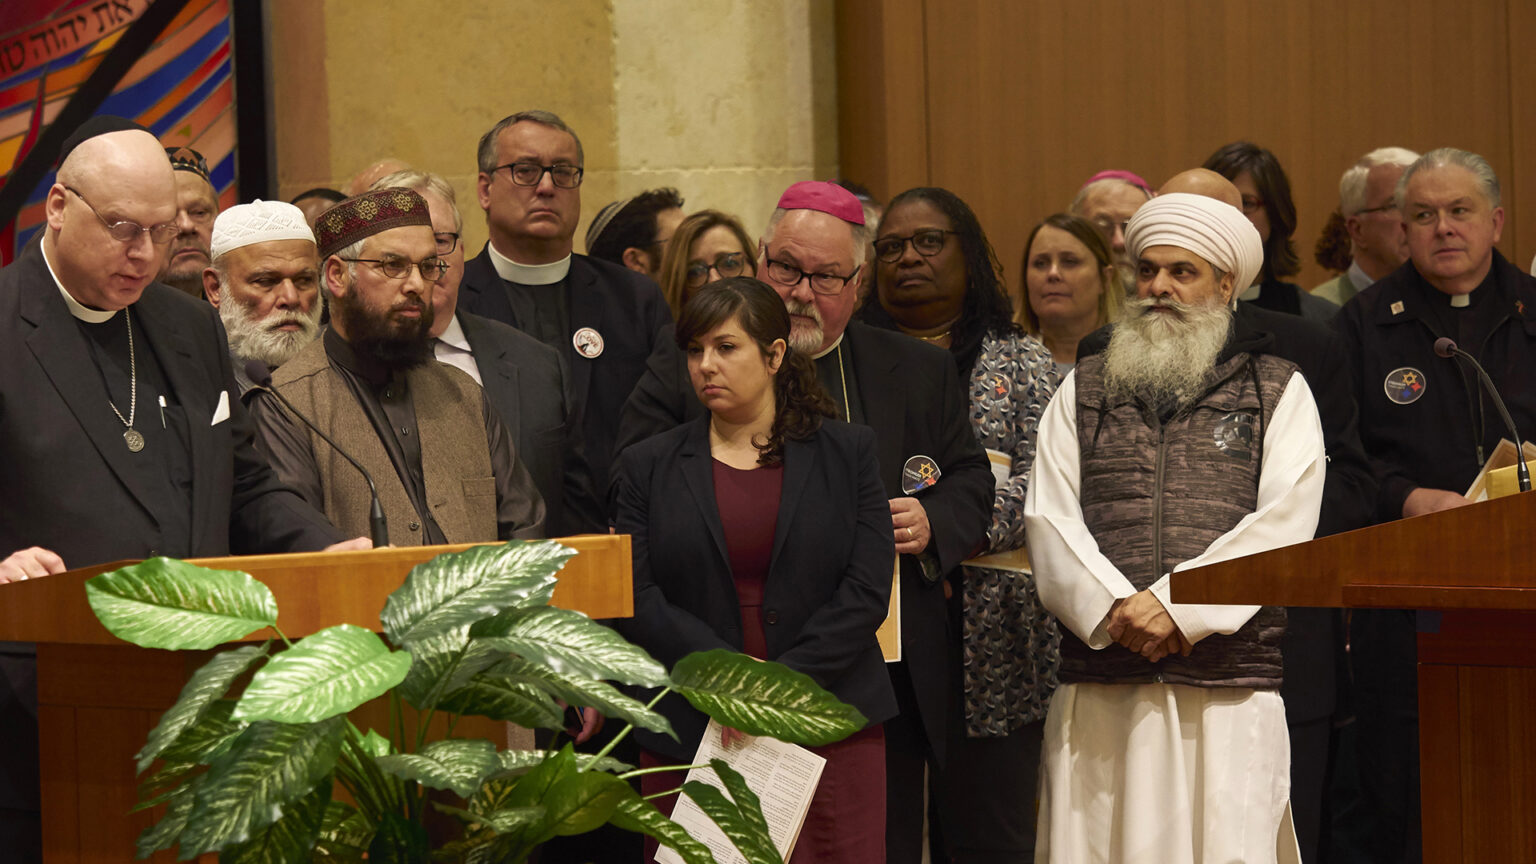 More than one dozen people, many clad in religious garments, stand on a stage with two podiums, with a rabbi standing behind one and speaking into a microphone.